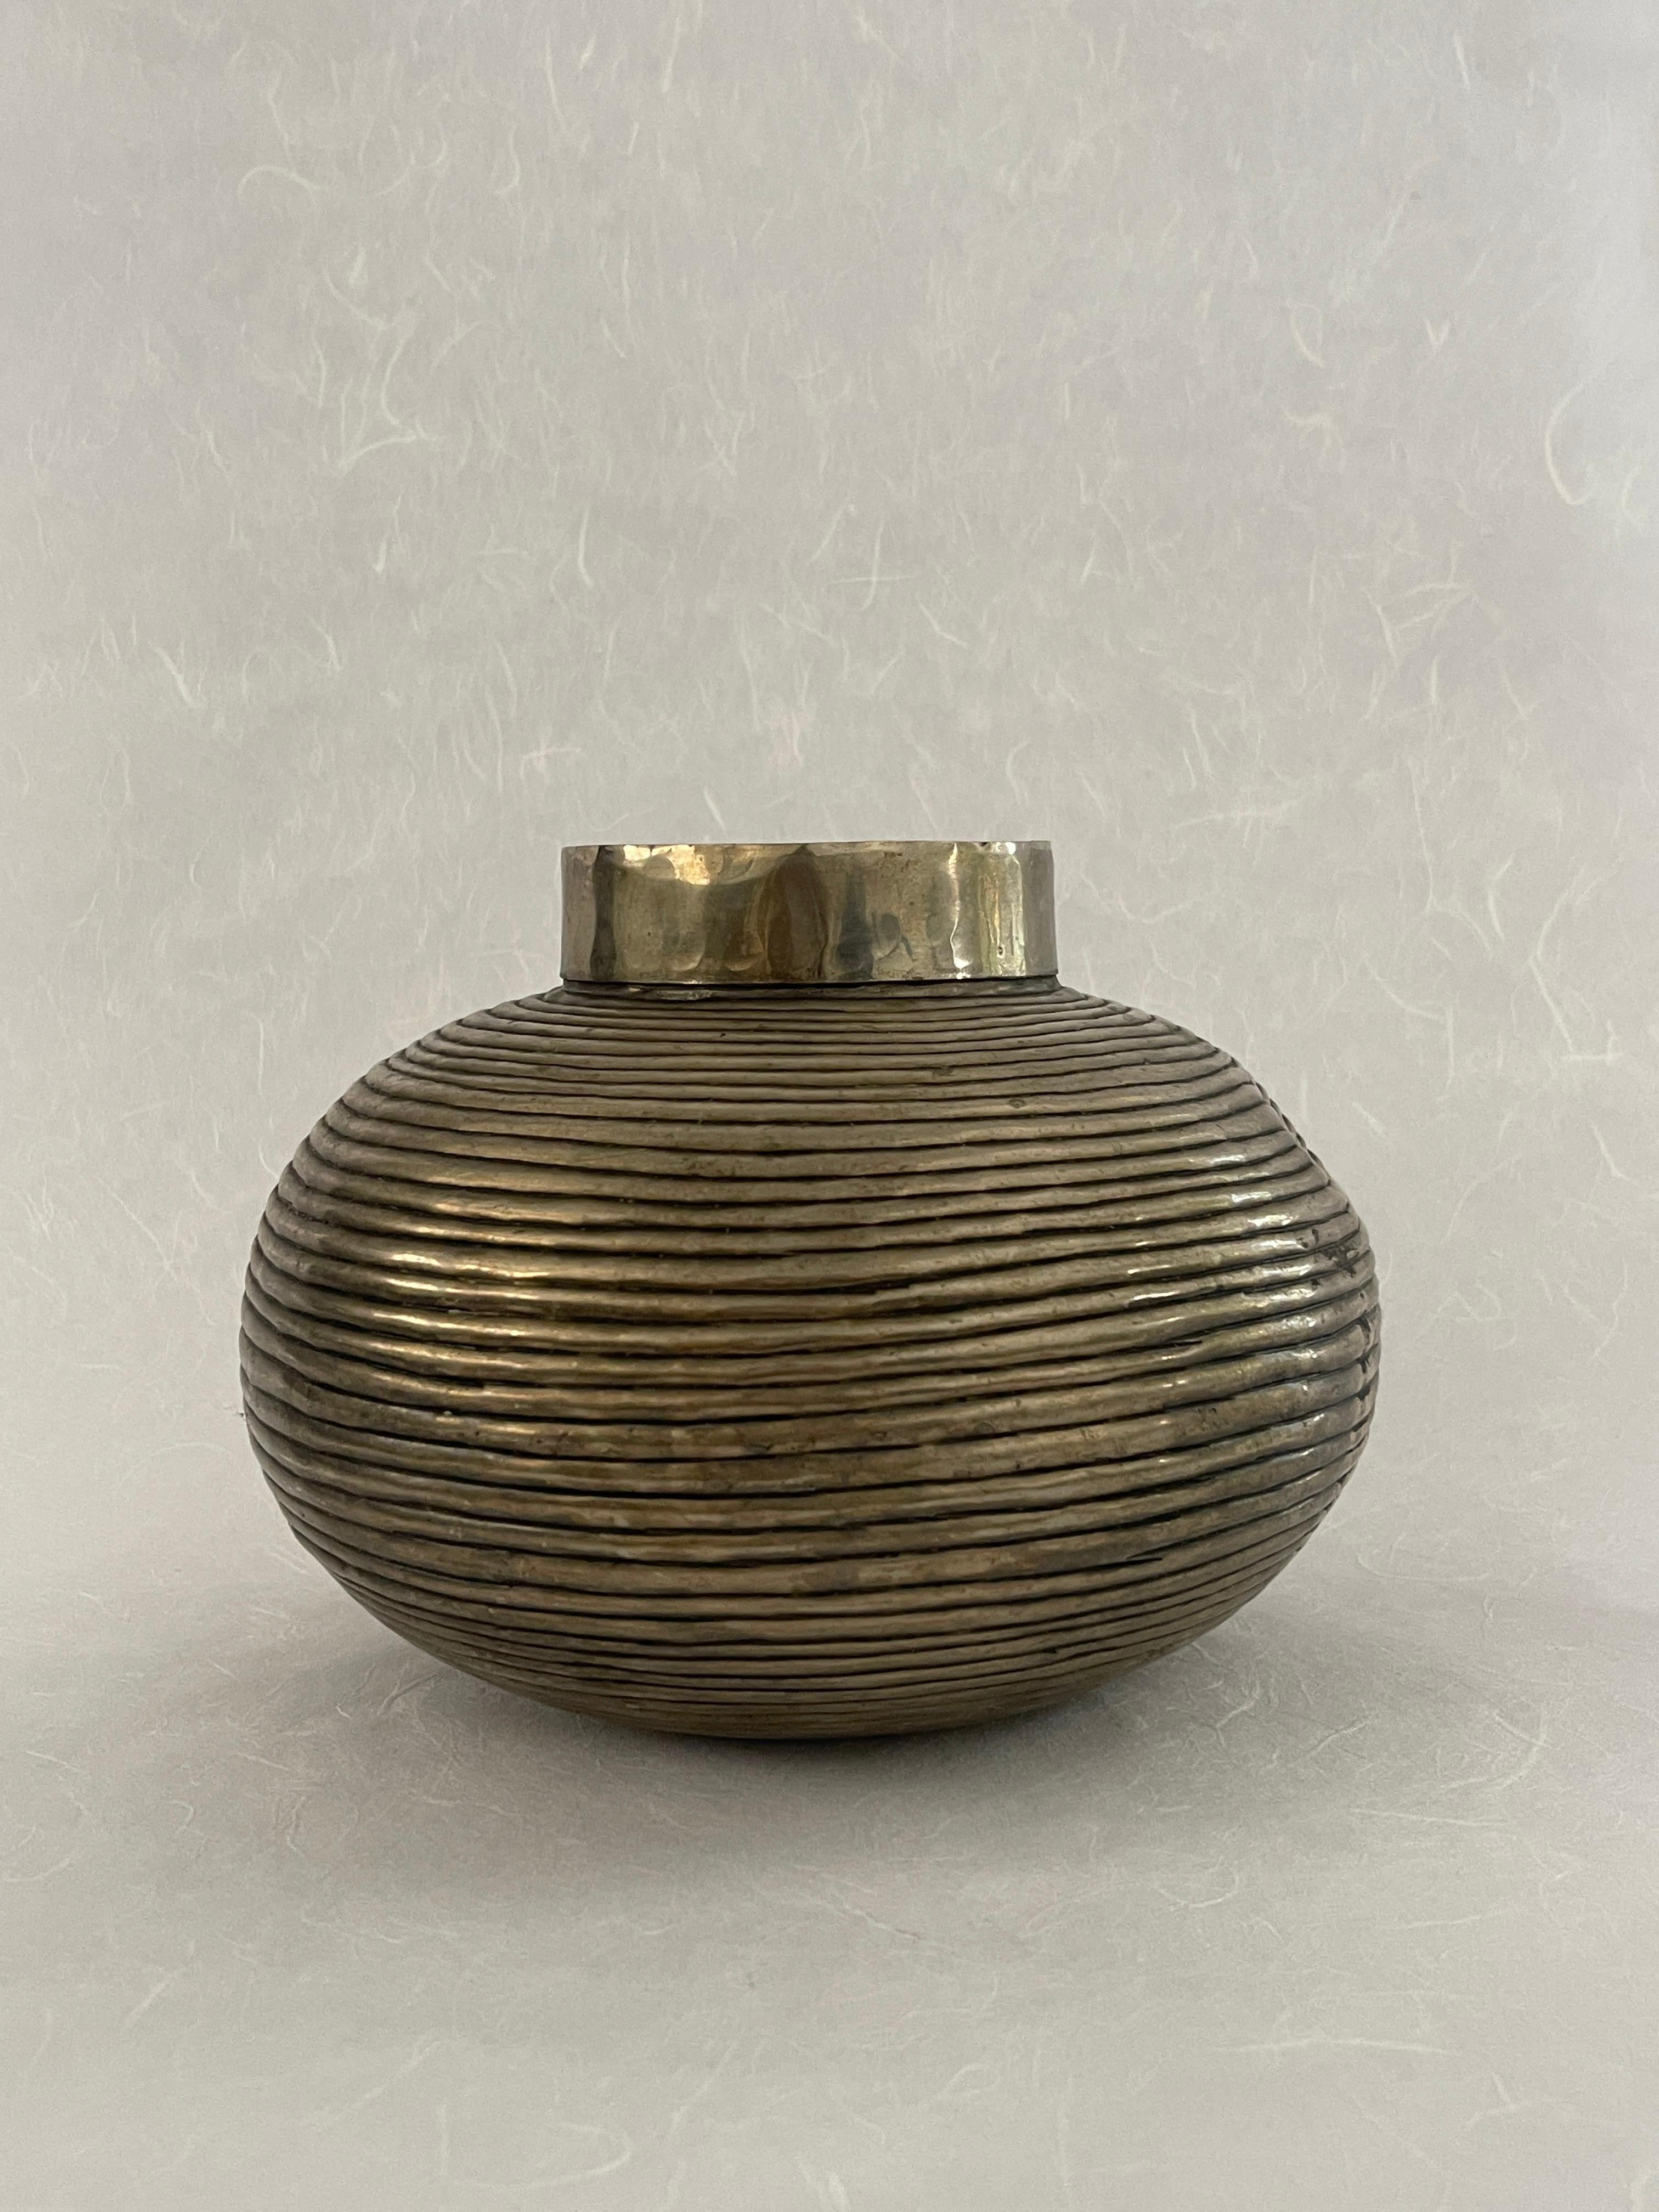 Unknown 20th Century Hand Crafted Brass Vase For Sale